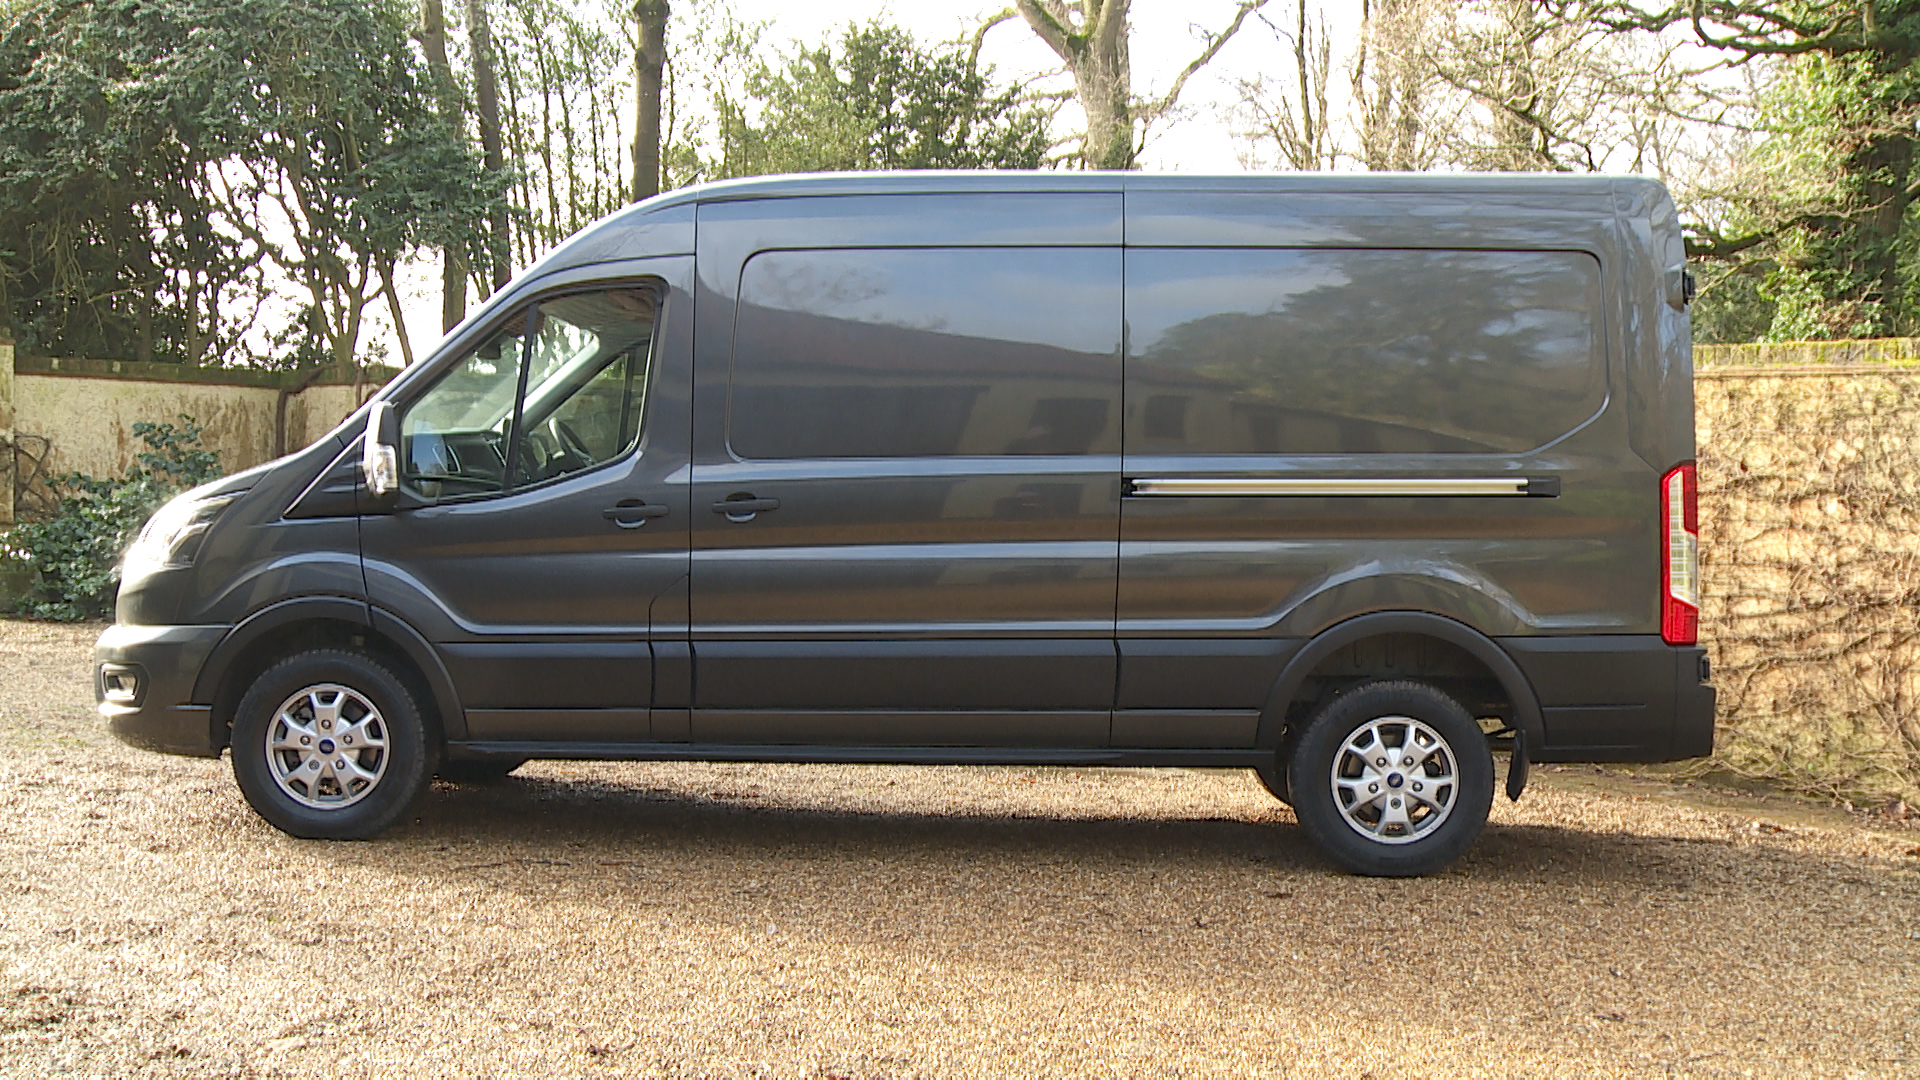 FORD E-TRANSIT 390 L3 RWD 198kW 68kWh H3 Trend Double Cab Van Auto